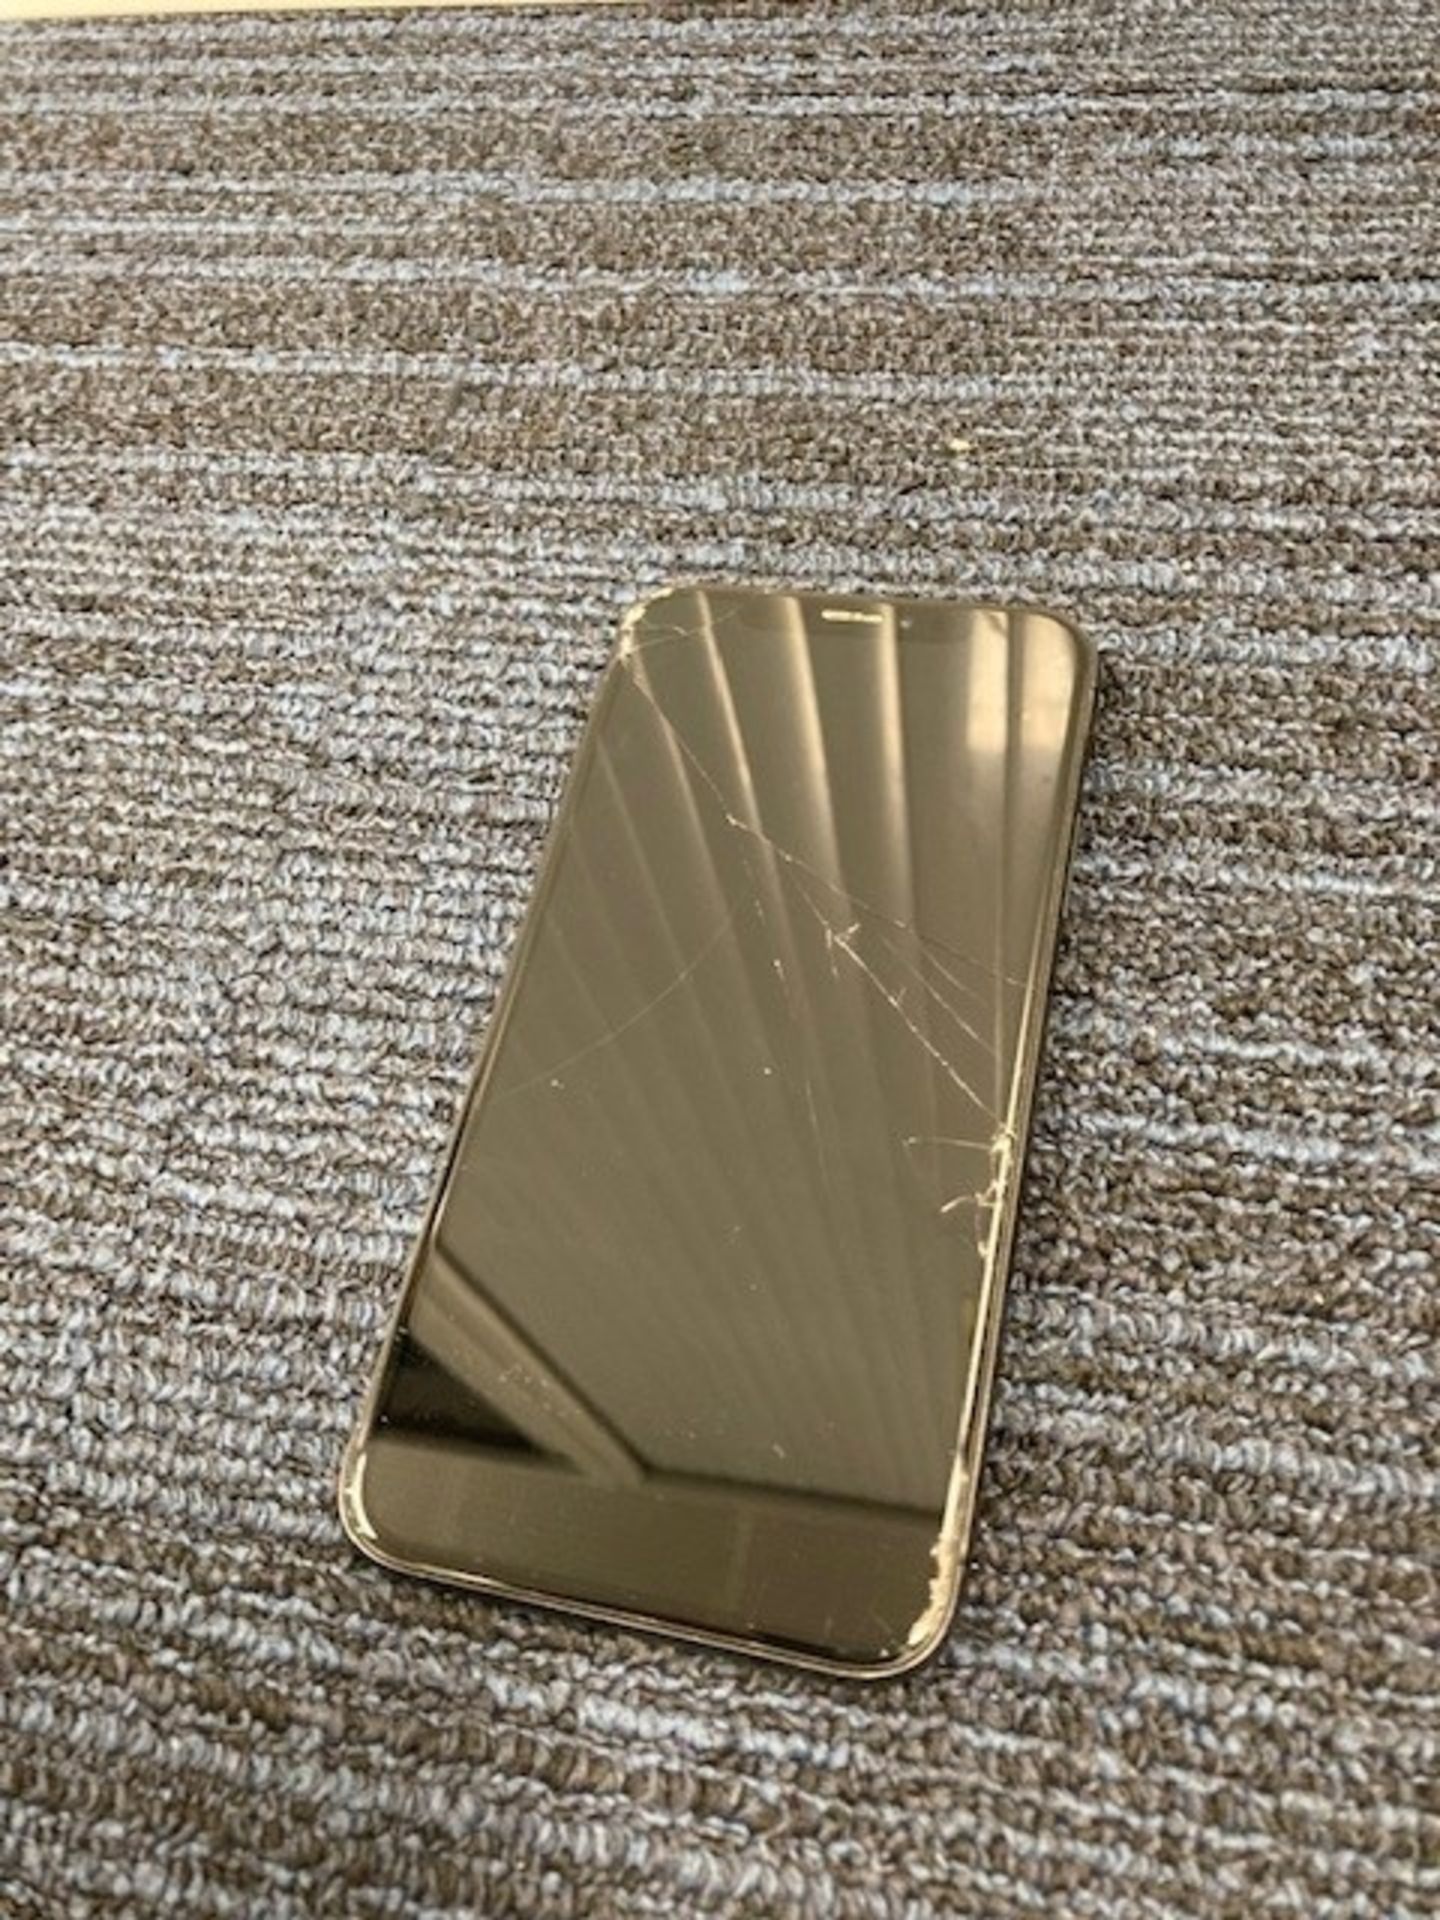 Apple iPhone XS 64GB Space Grey - Image 2 of 4